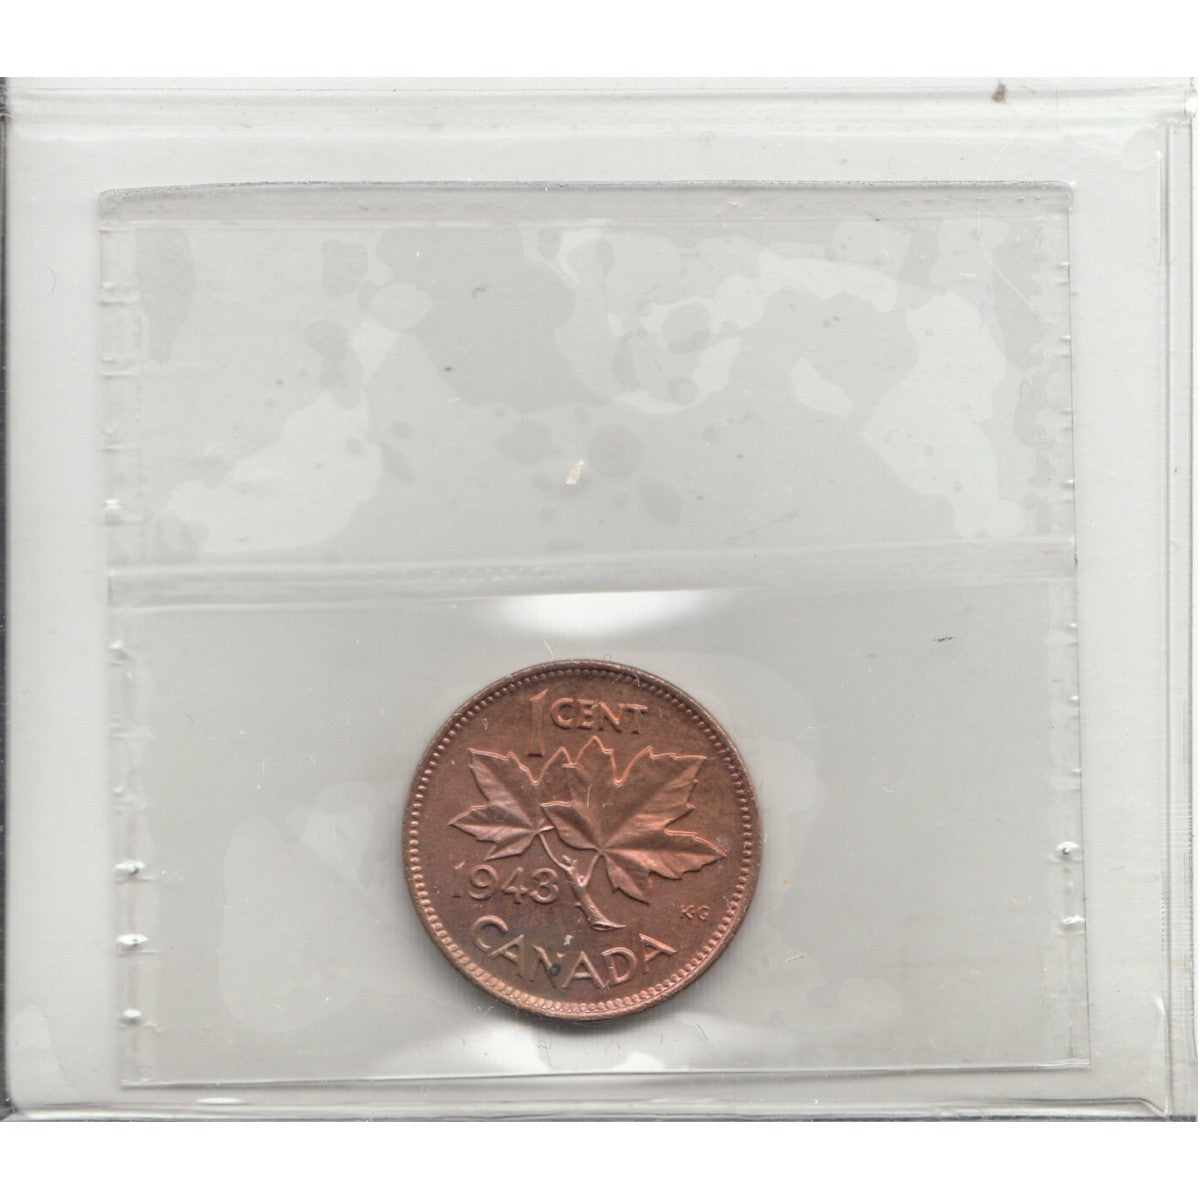 1943 Canada 1-cent ICCS Certified MS-64 Red